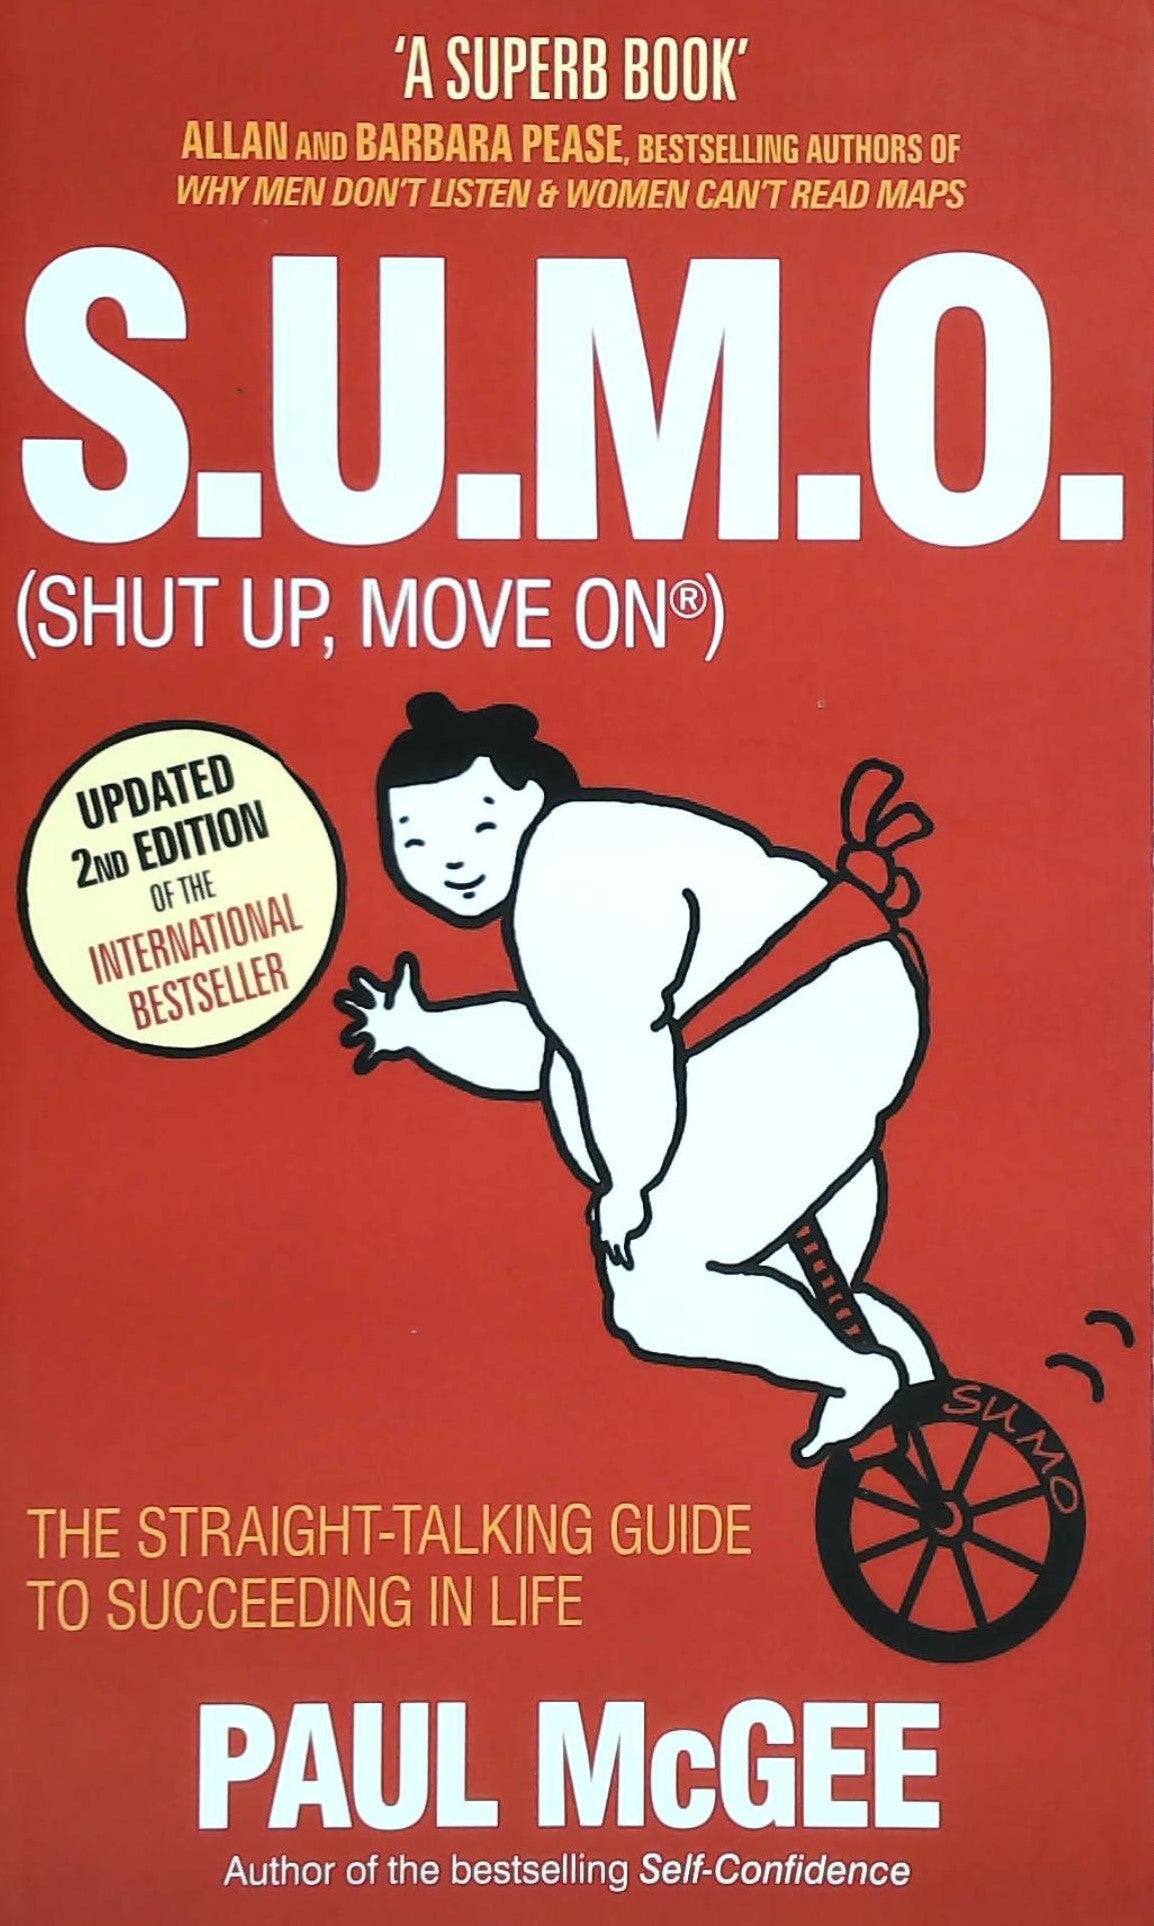 Livre ISBN  S.U.M.O. (Shut up, Move on) : The Straight-Talking Guide to Succeeding in Life (Paul McGee)